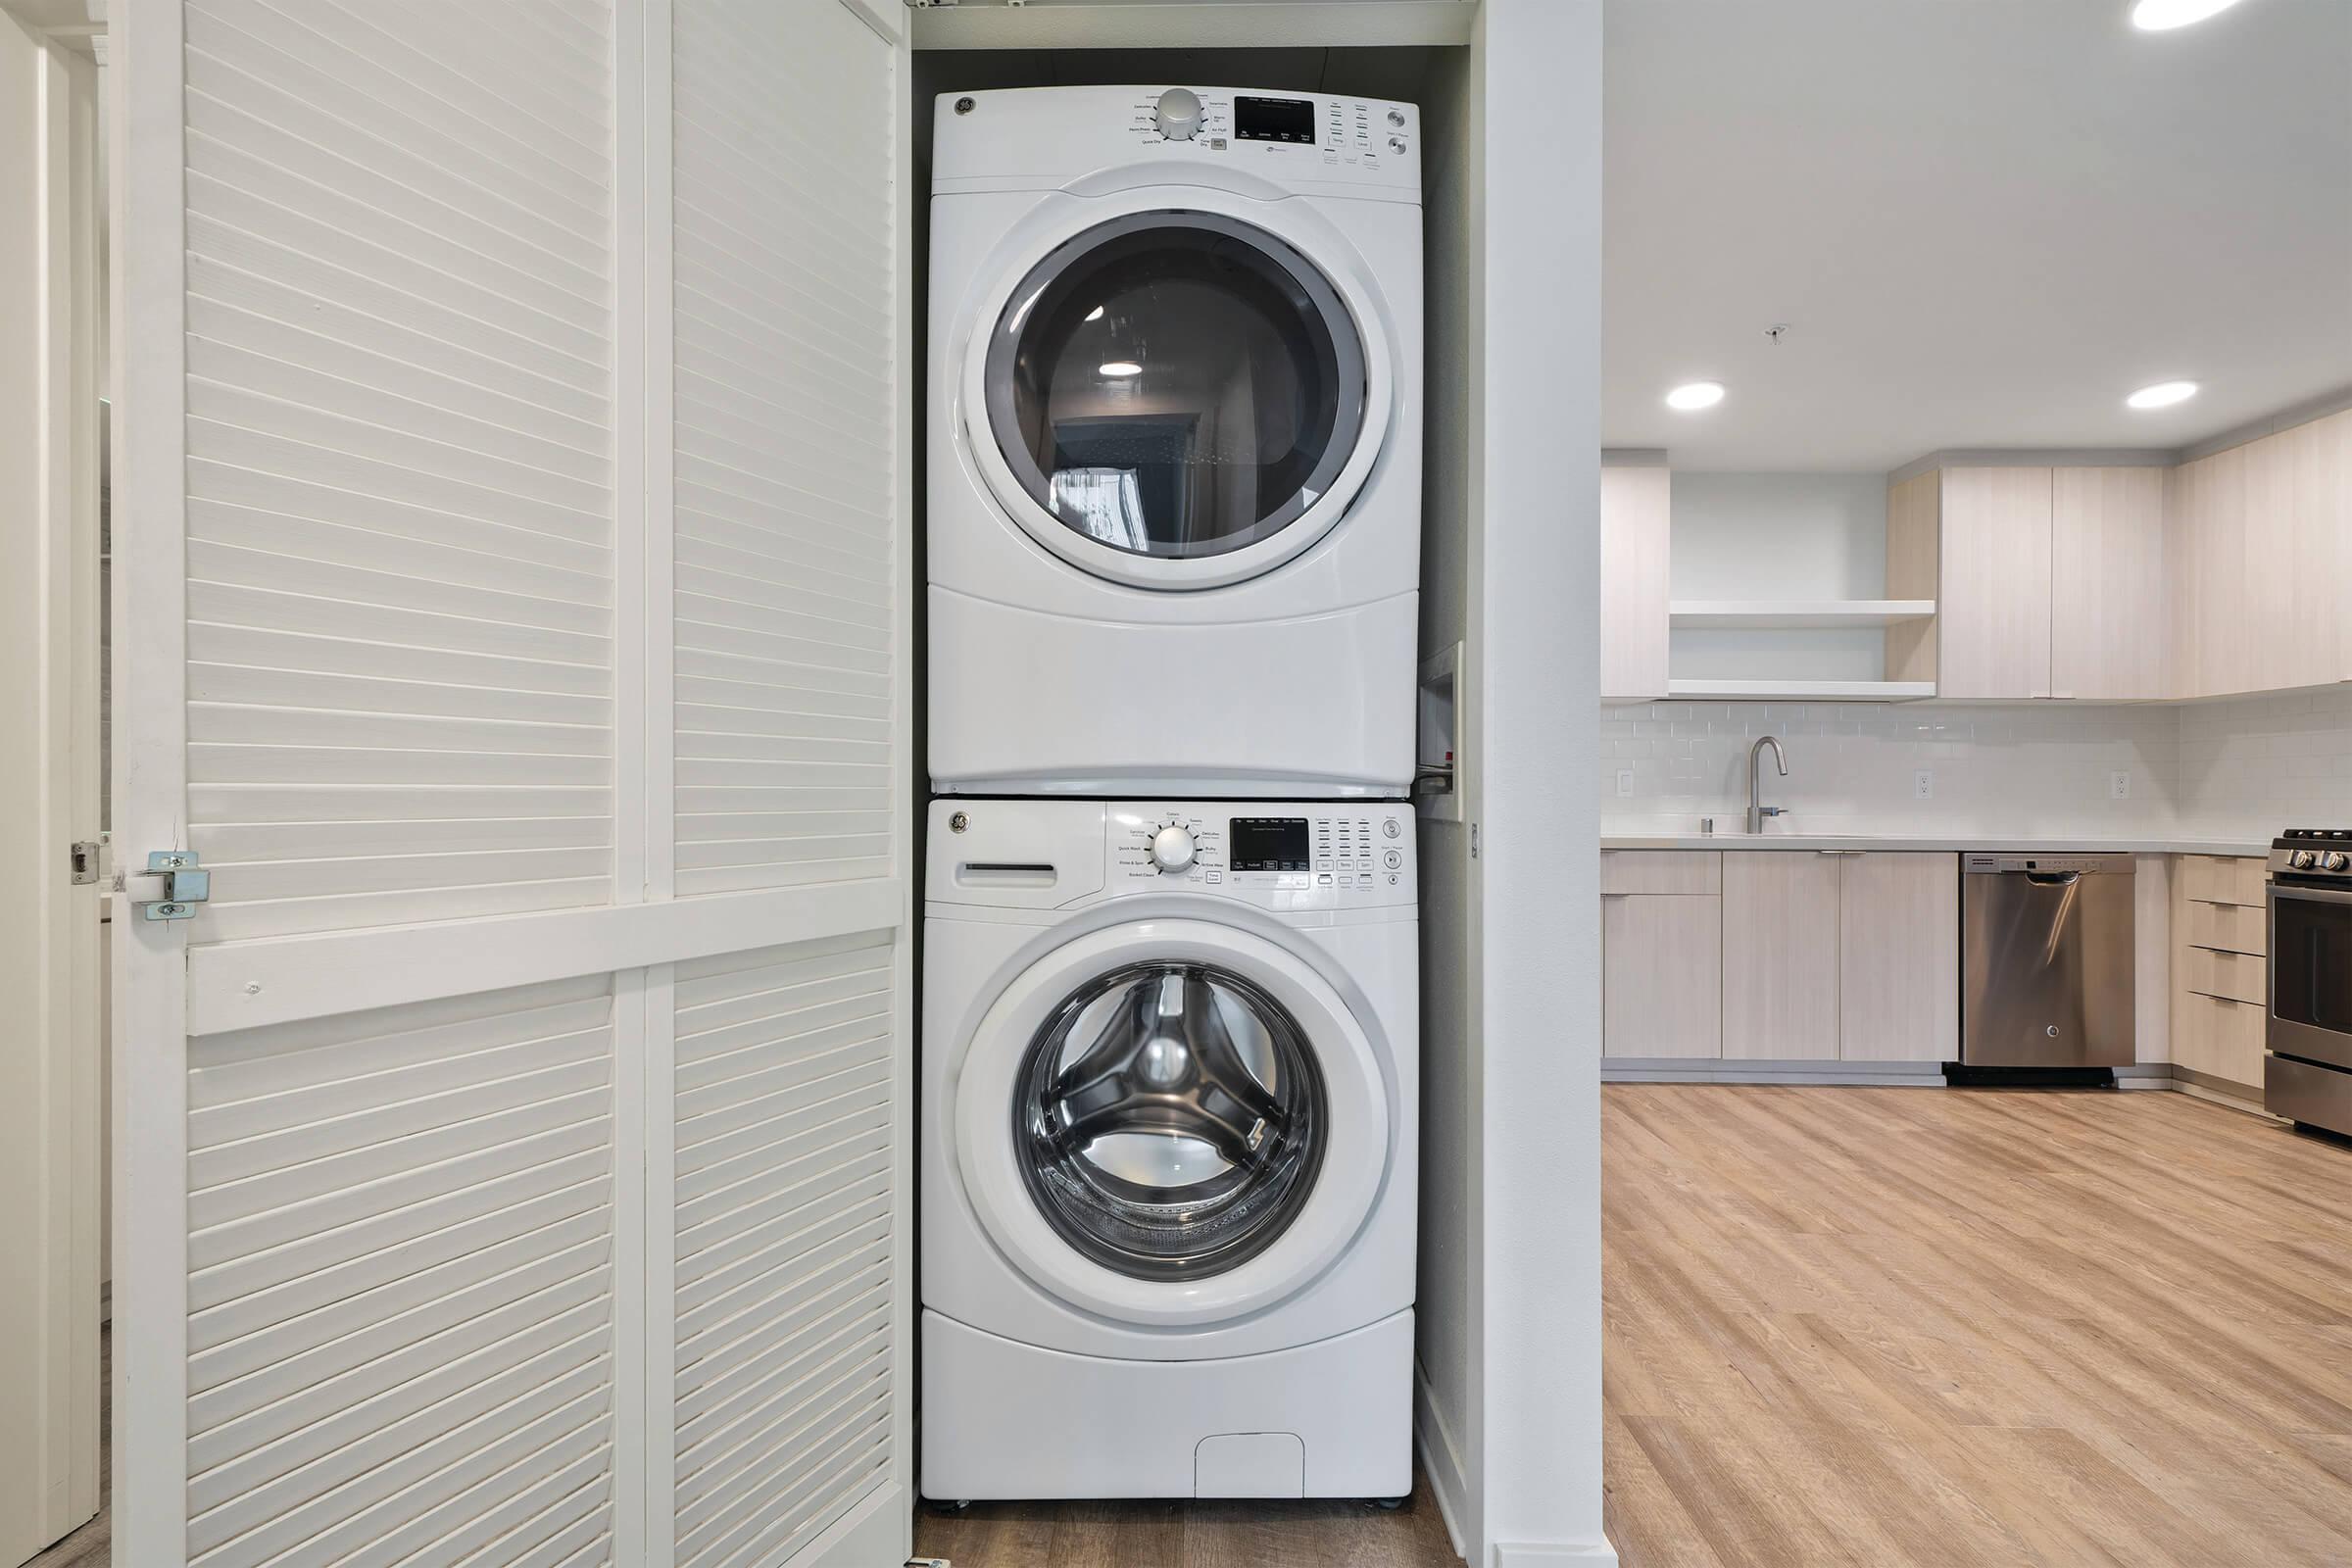 Get laundry done easily with our full-size front-loading washer and dryer